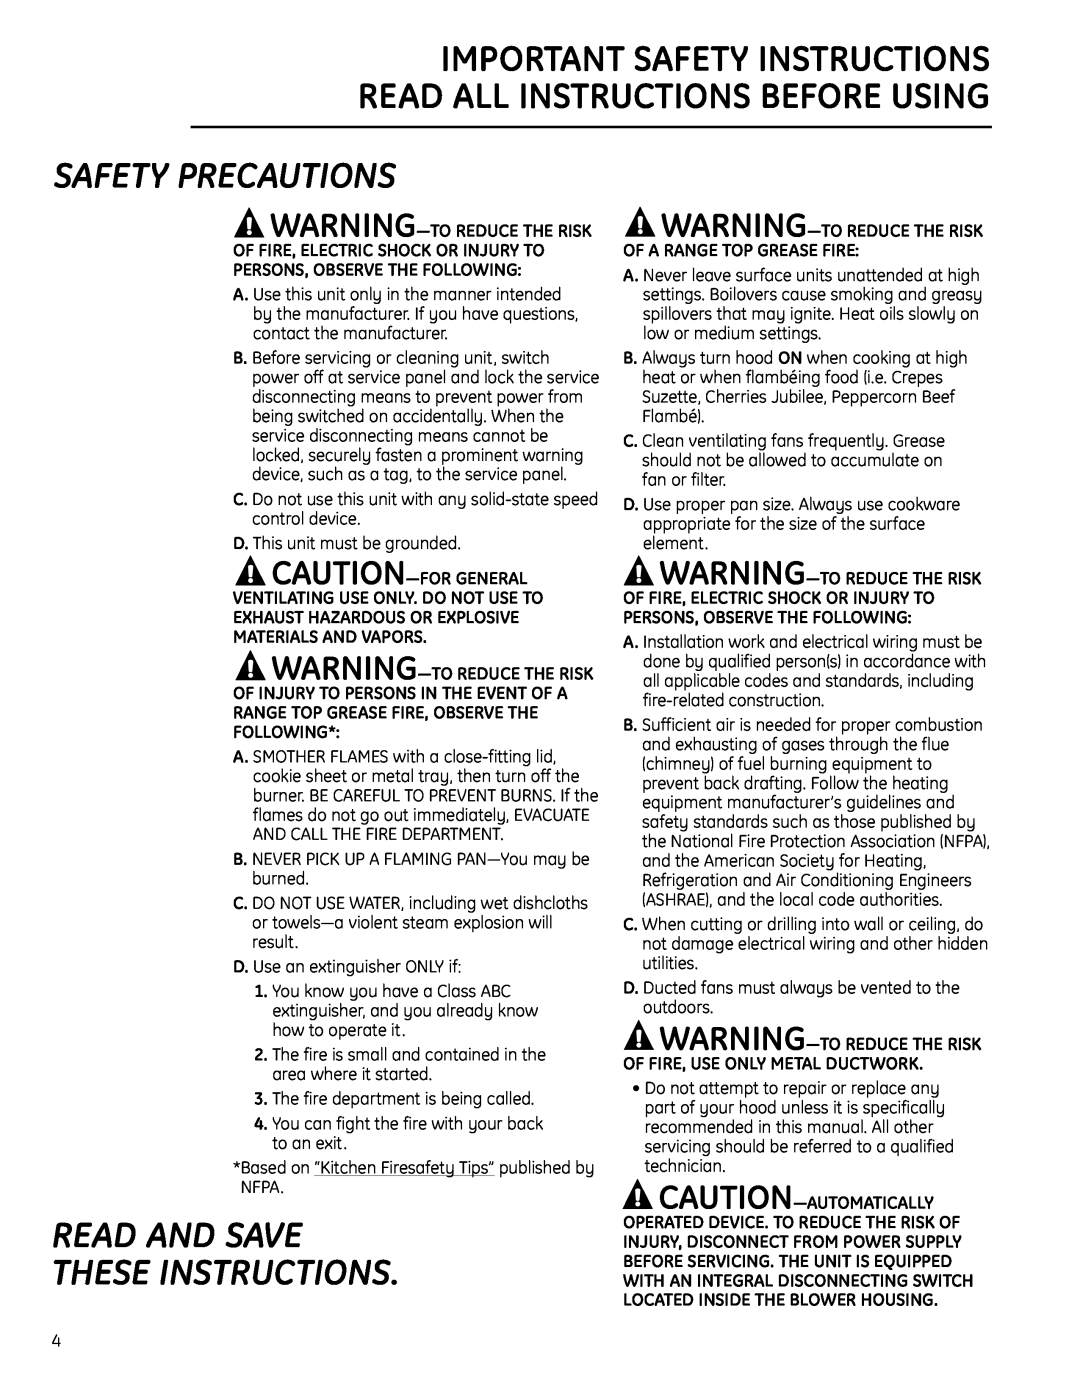 GE ZVC48LSS Safety Precautions, Read And Save These Instructions, Caution-For General Ventilating Use Only. Do Not Use To 